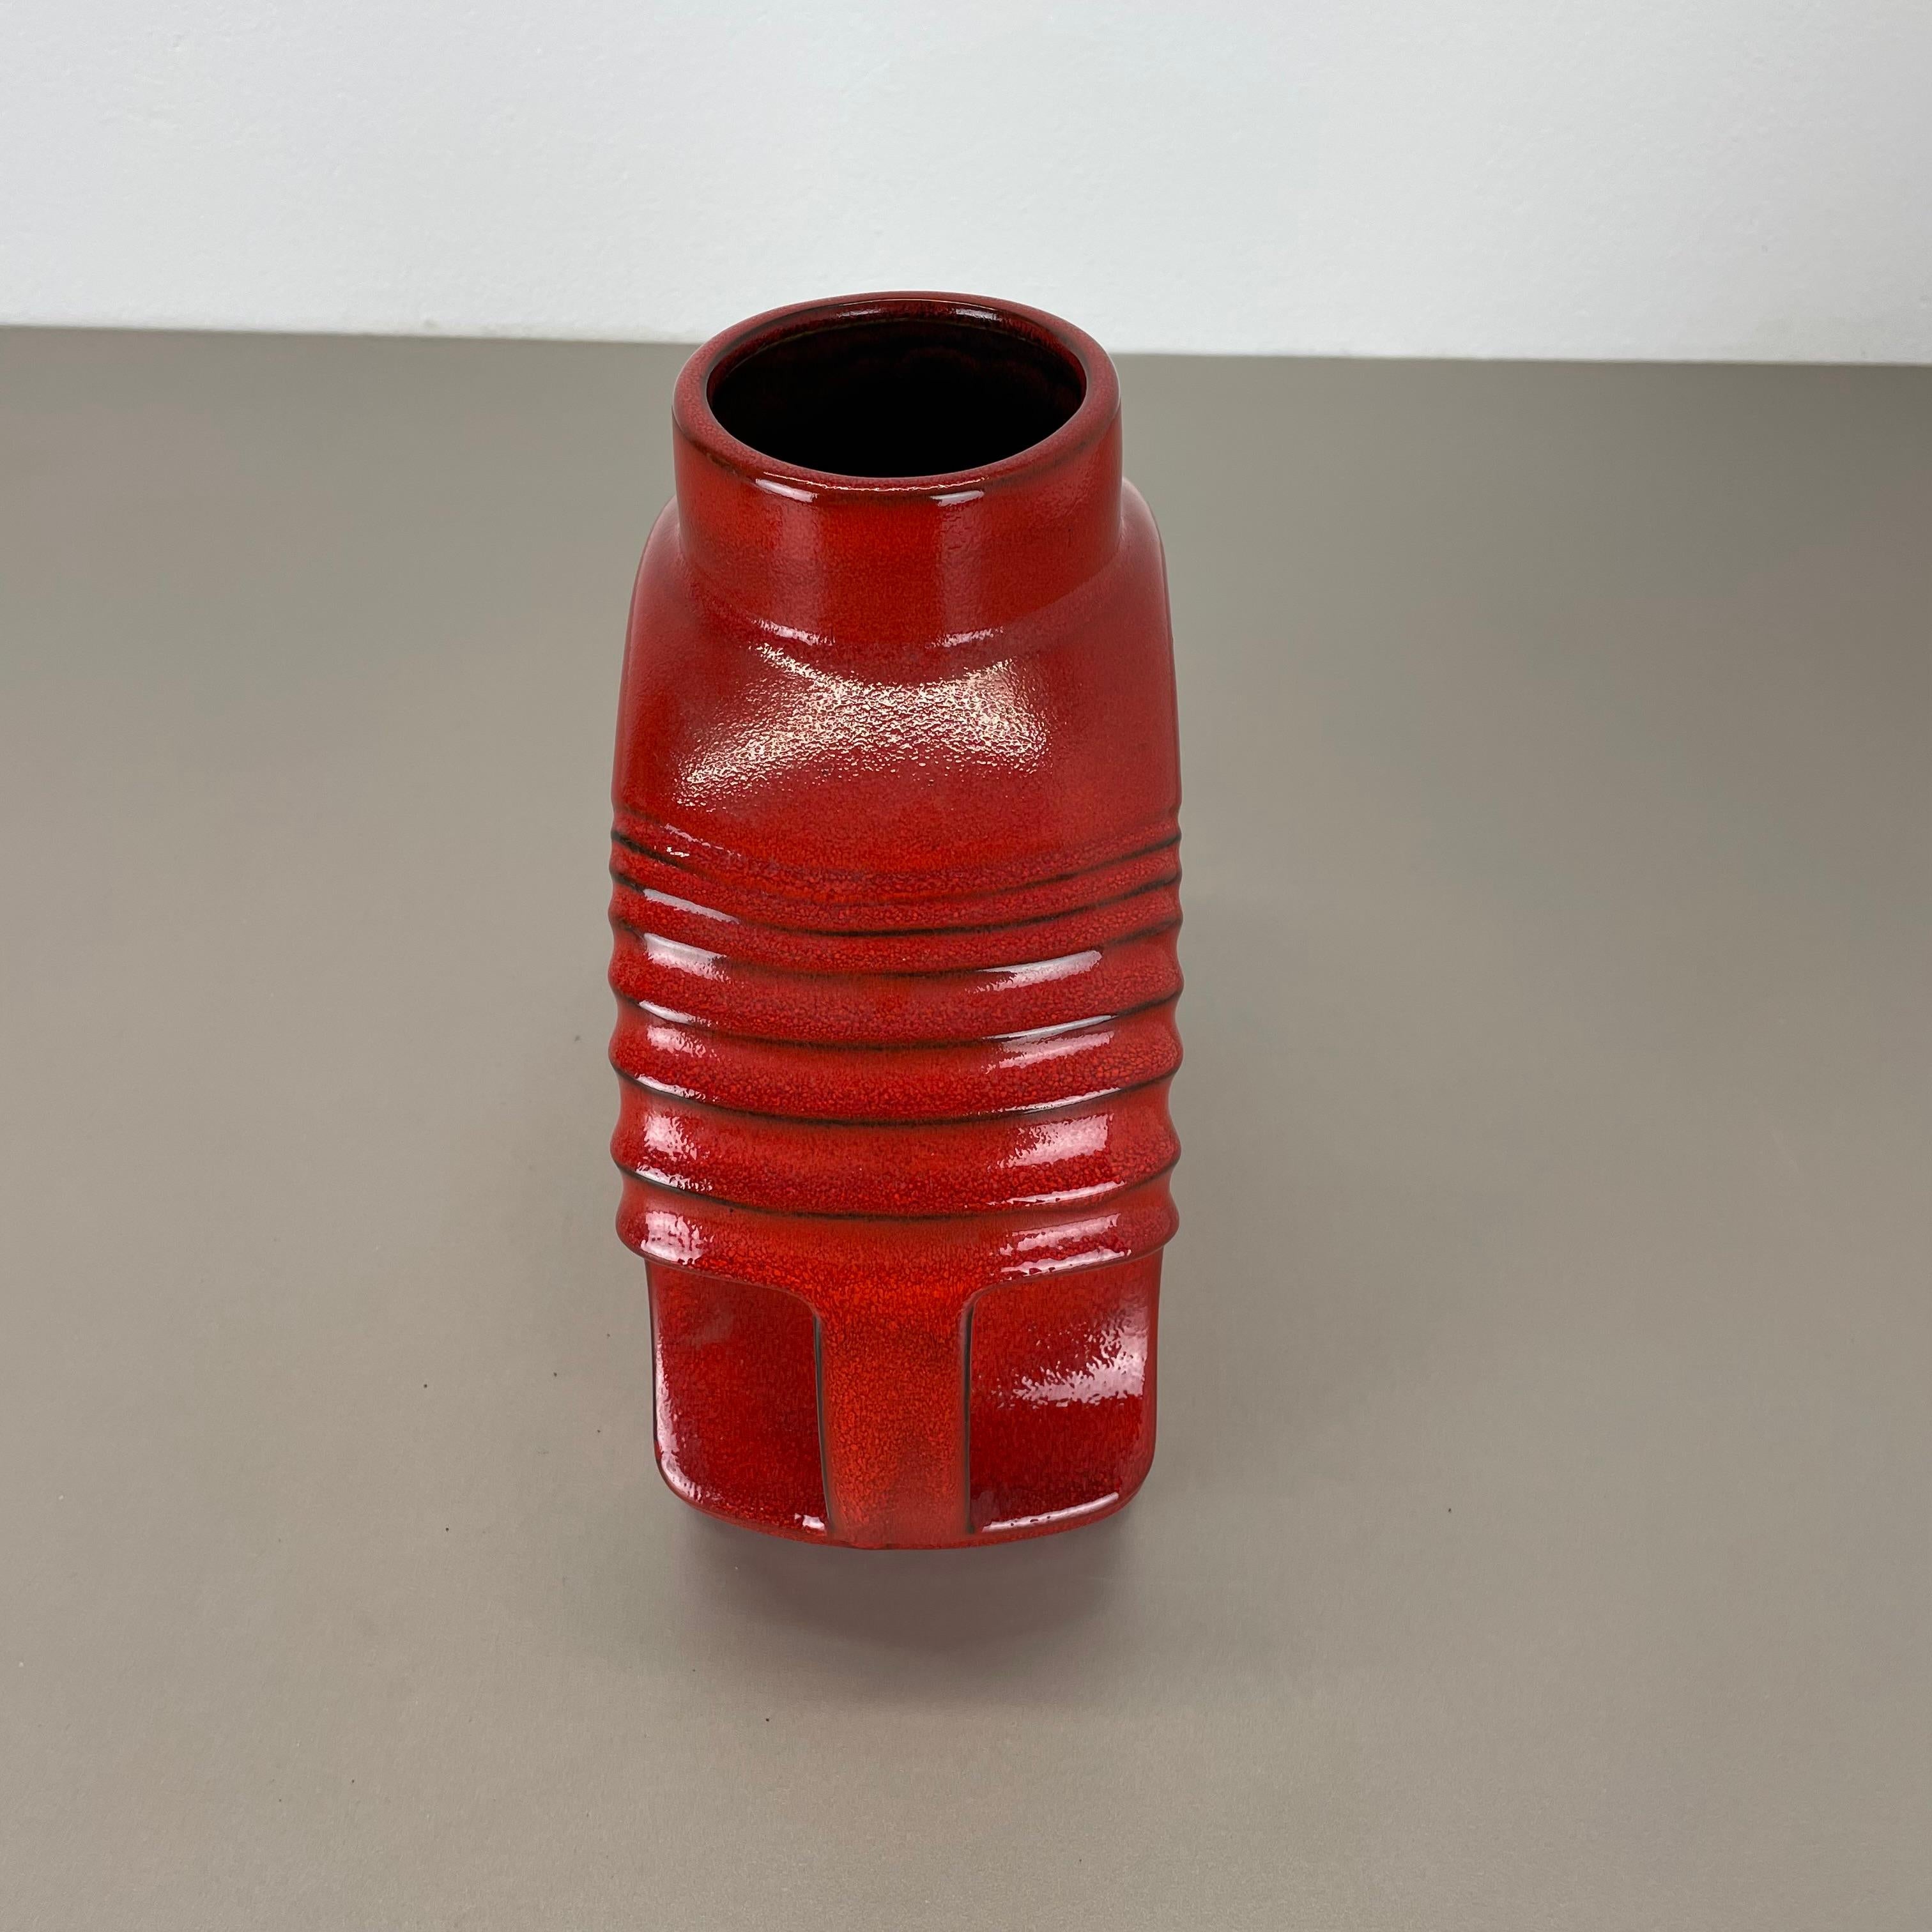 Large red abstract vase object by Cari Zalloni for Steuler, Germany, 1970s For Sale 4